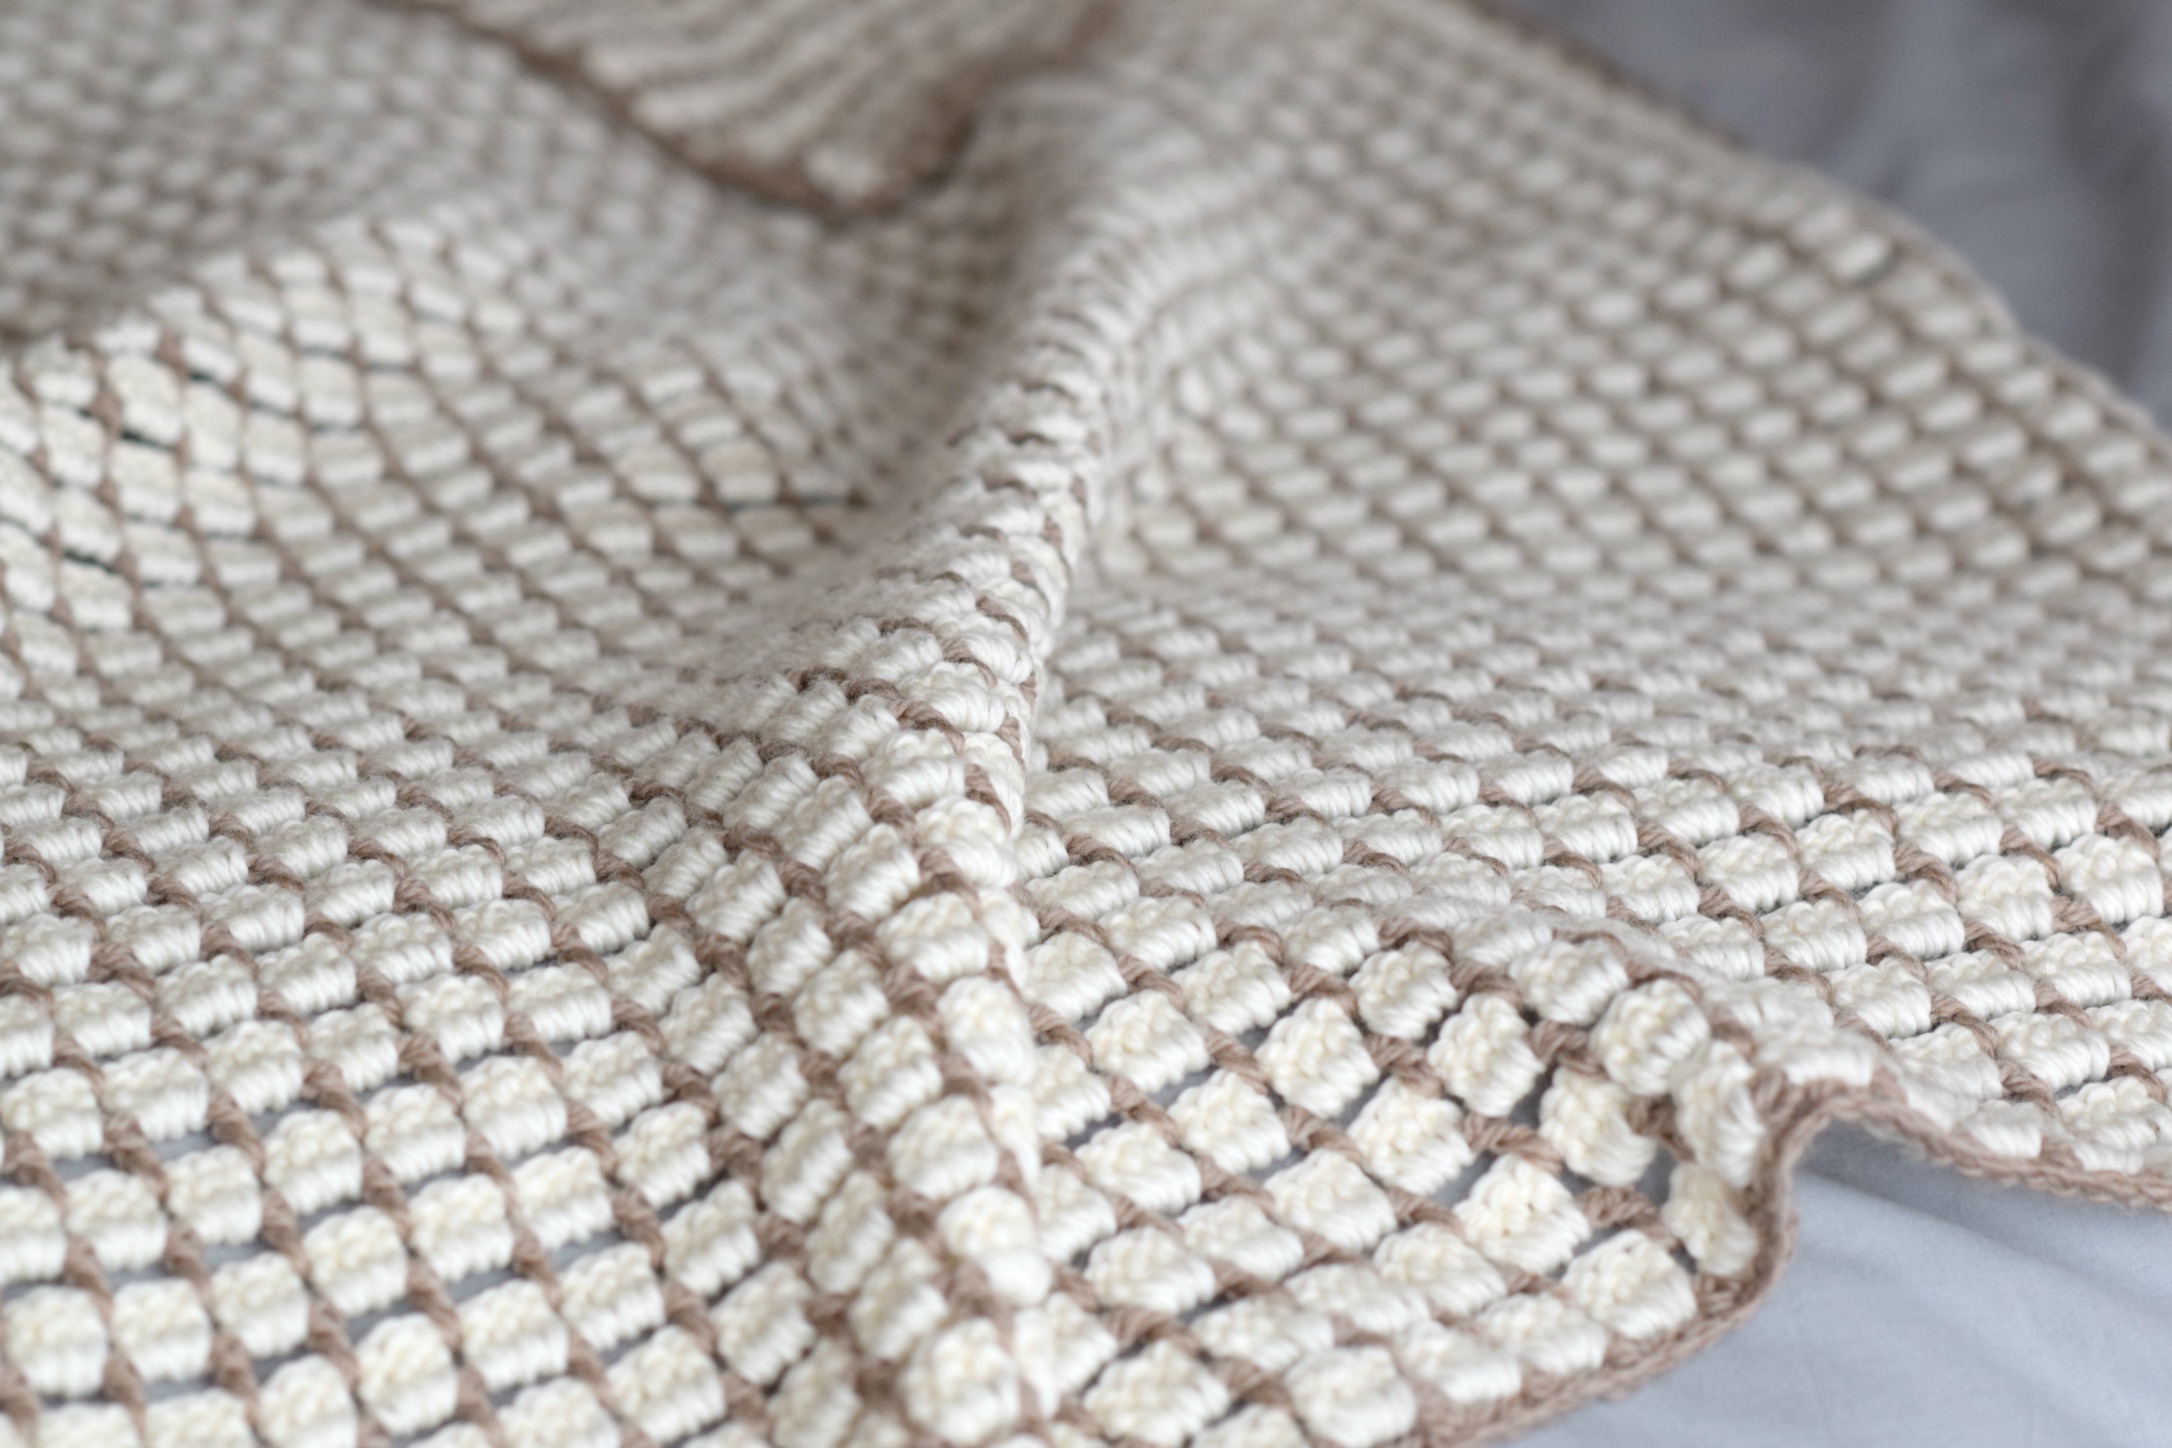 30 Free Crochet Blanket Patterns – Mama In A Stitch